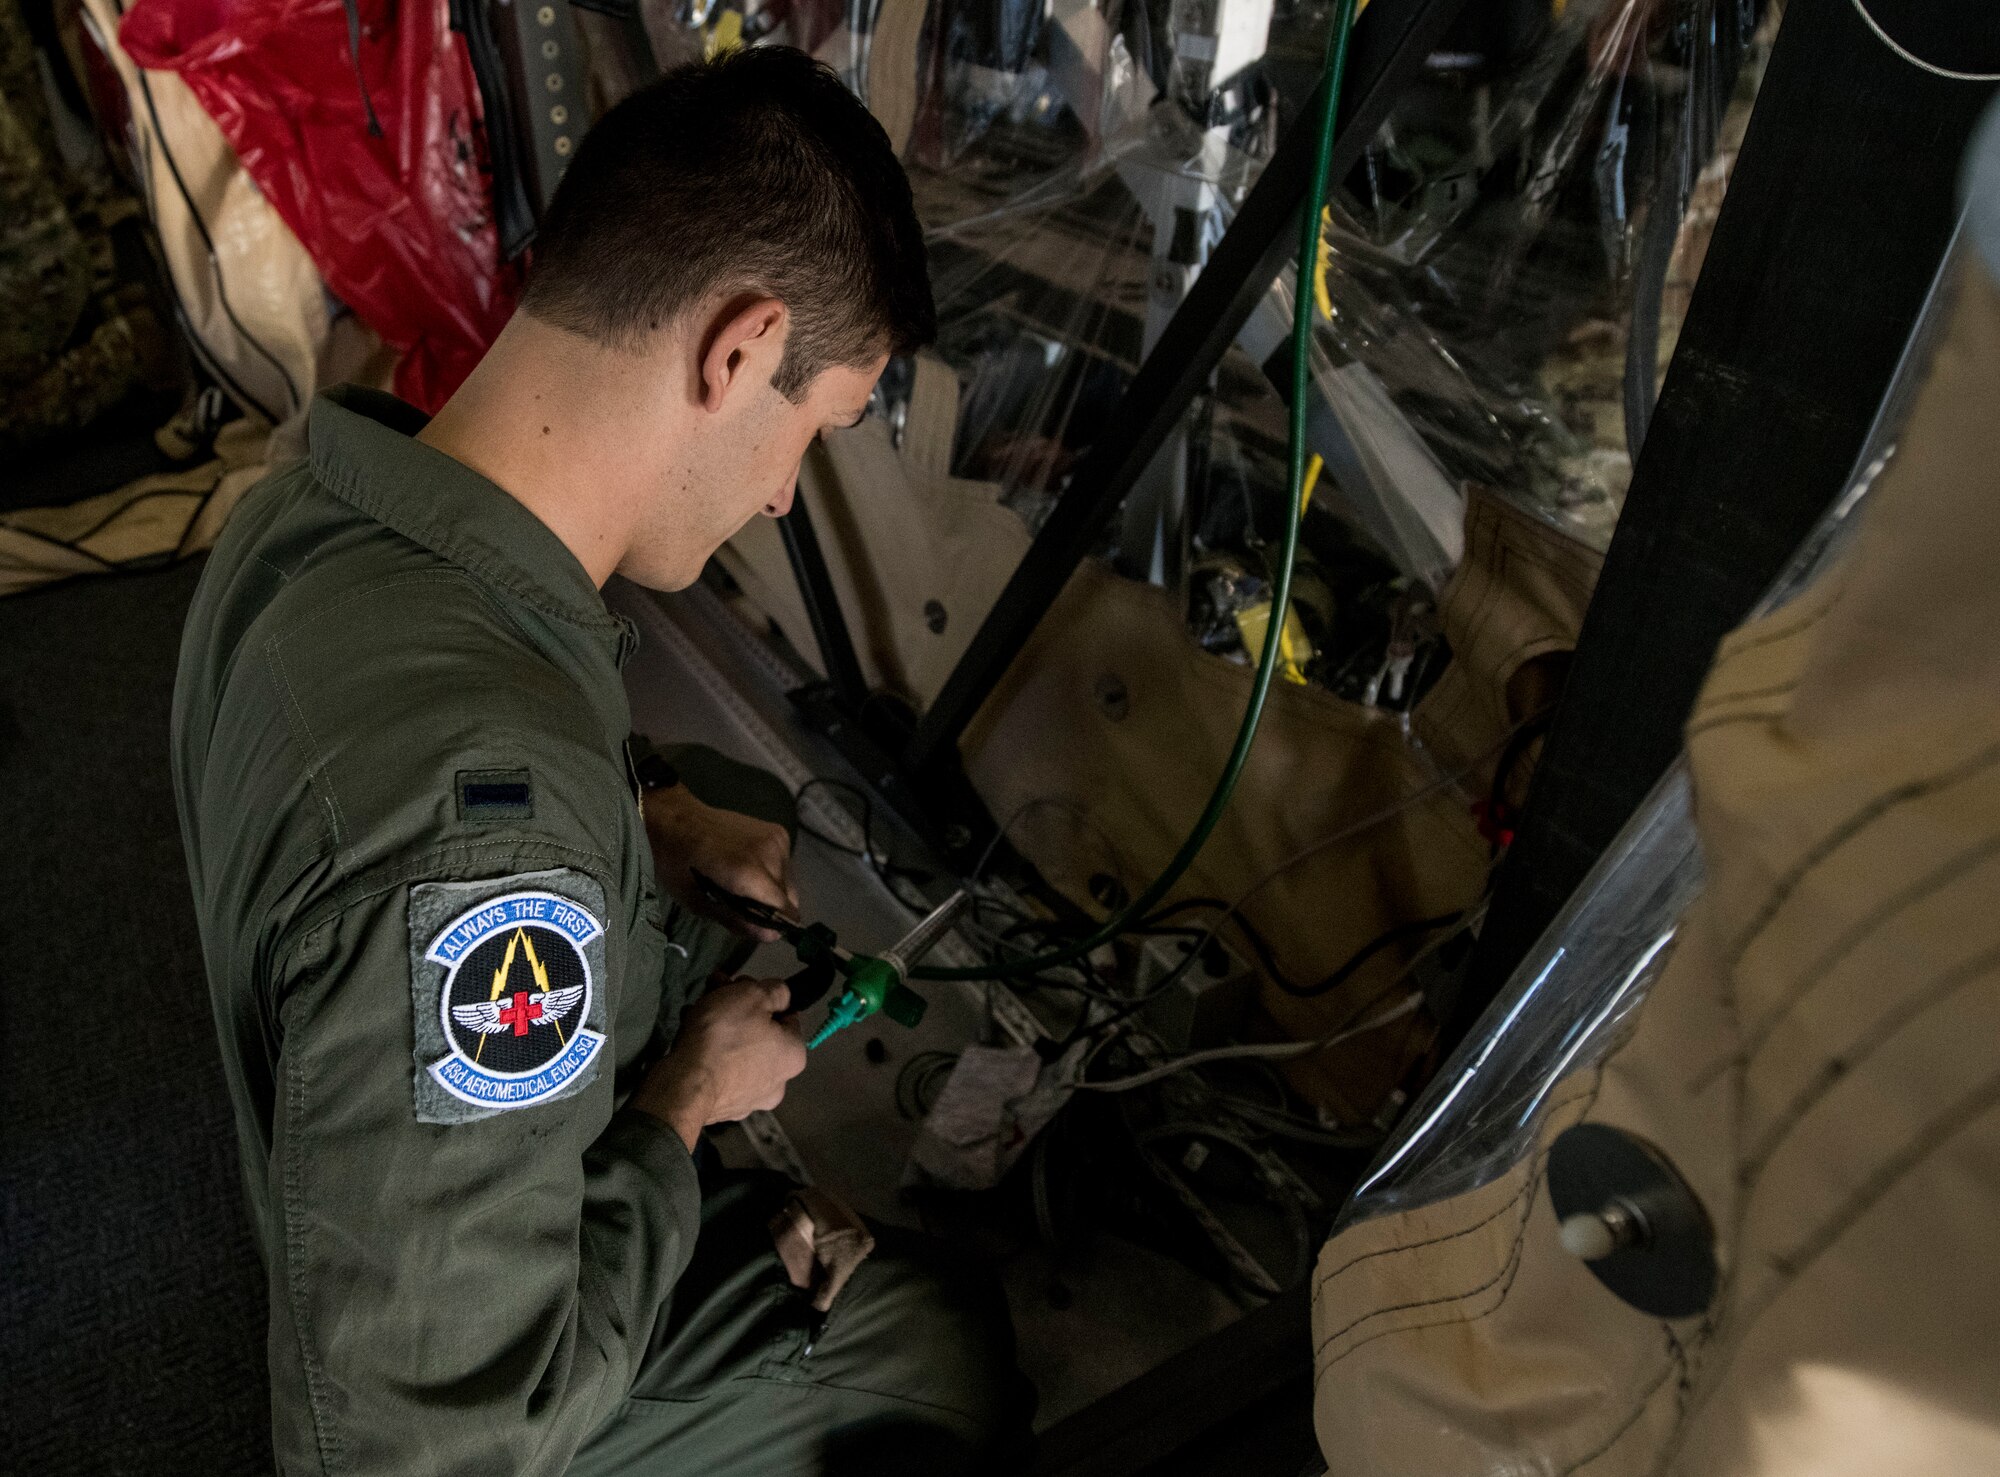 1st. Lt. PJ Didenedetto, a flight nurse assigned to the 43rd Aeromedical Evacuation Squadron from Pope Army Air Field, N.C., fastens tubing on a Transport Isolation System during a TIS training exercise at Joint Base Charleston, S.C., October 23, 2019. The TIS is a device used to transport Ebola patients, either by C-17 Globemaster III or C-130 Hercules, while preventing the spread of disease to medical personnel and aircrews until the patient can get to one of three designated hospitals in the United States that can treat Ebola patients. JB Charleston is currently the only military installation with a TIS. The TIS mission is a sub-specialty of the aeromedical evacuation mission which requires frequent training to maintain readiness.